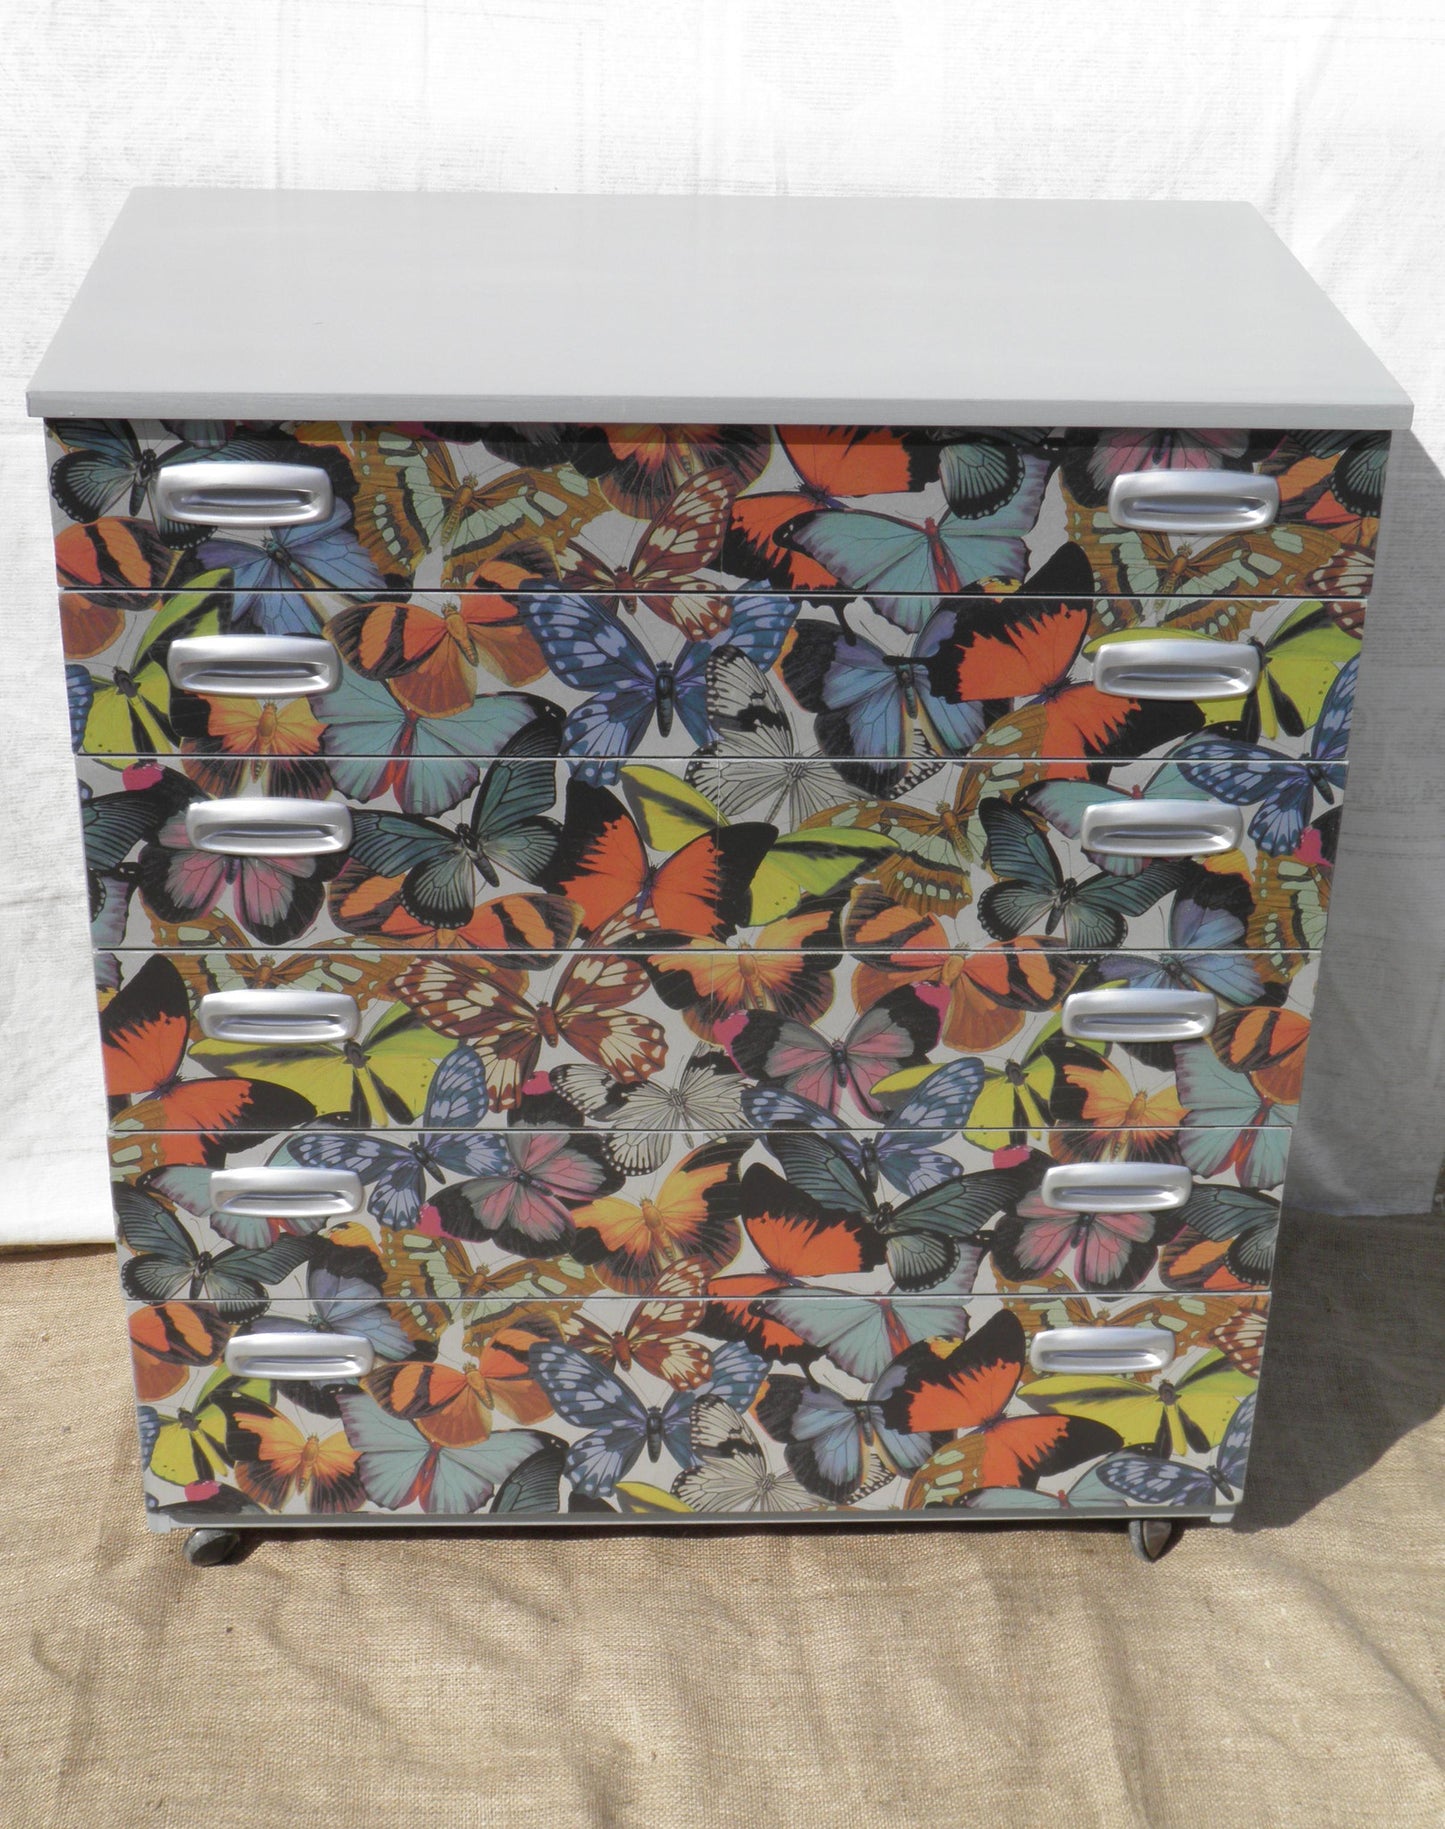 Attractive Upcycled Vintage Retro Schreiber Chest Of Drawers